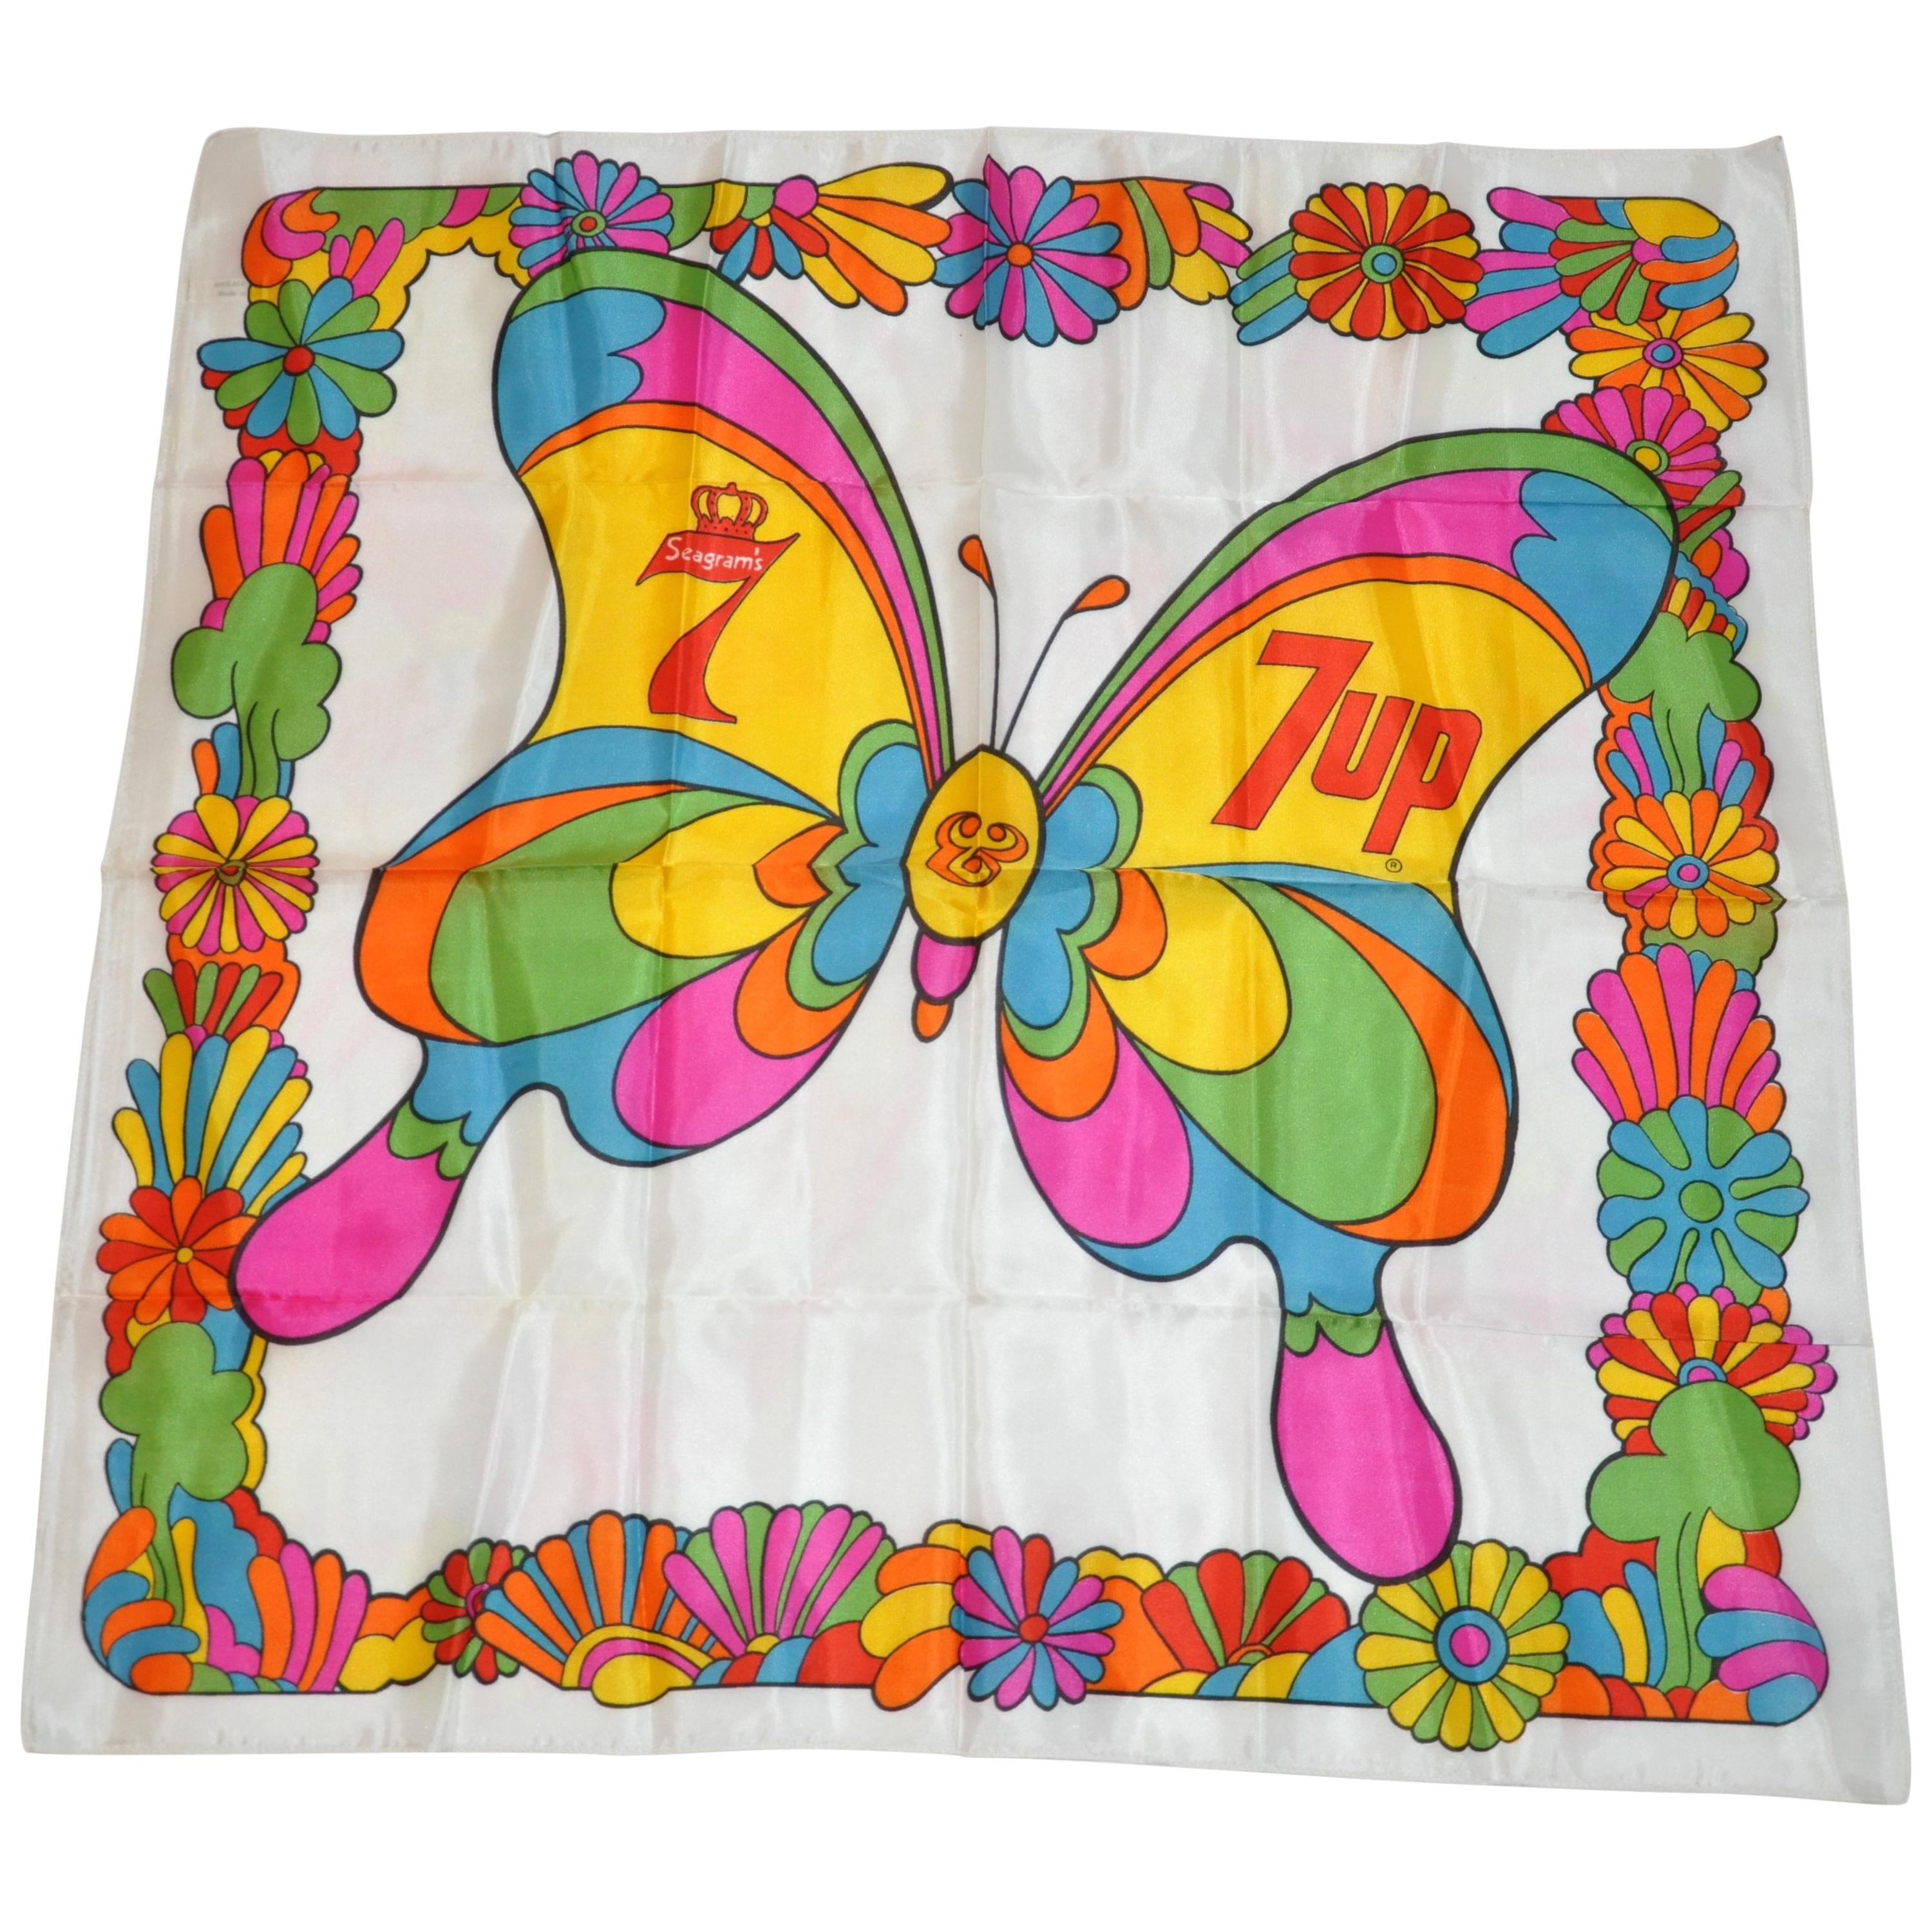 Iconic Vivid "Mod Butterfly" by Peter Max for Seagram's & 7Up Acetate Scarf For Sale